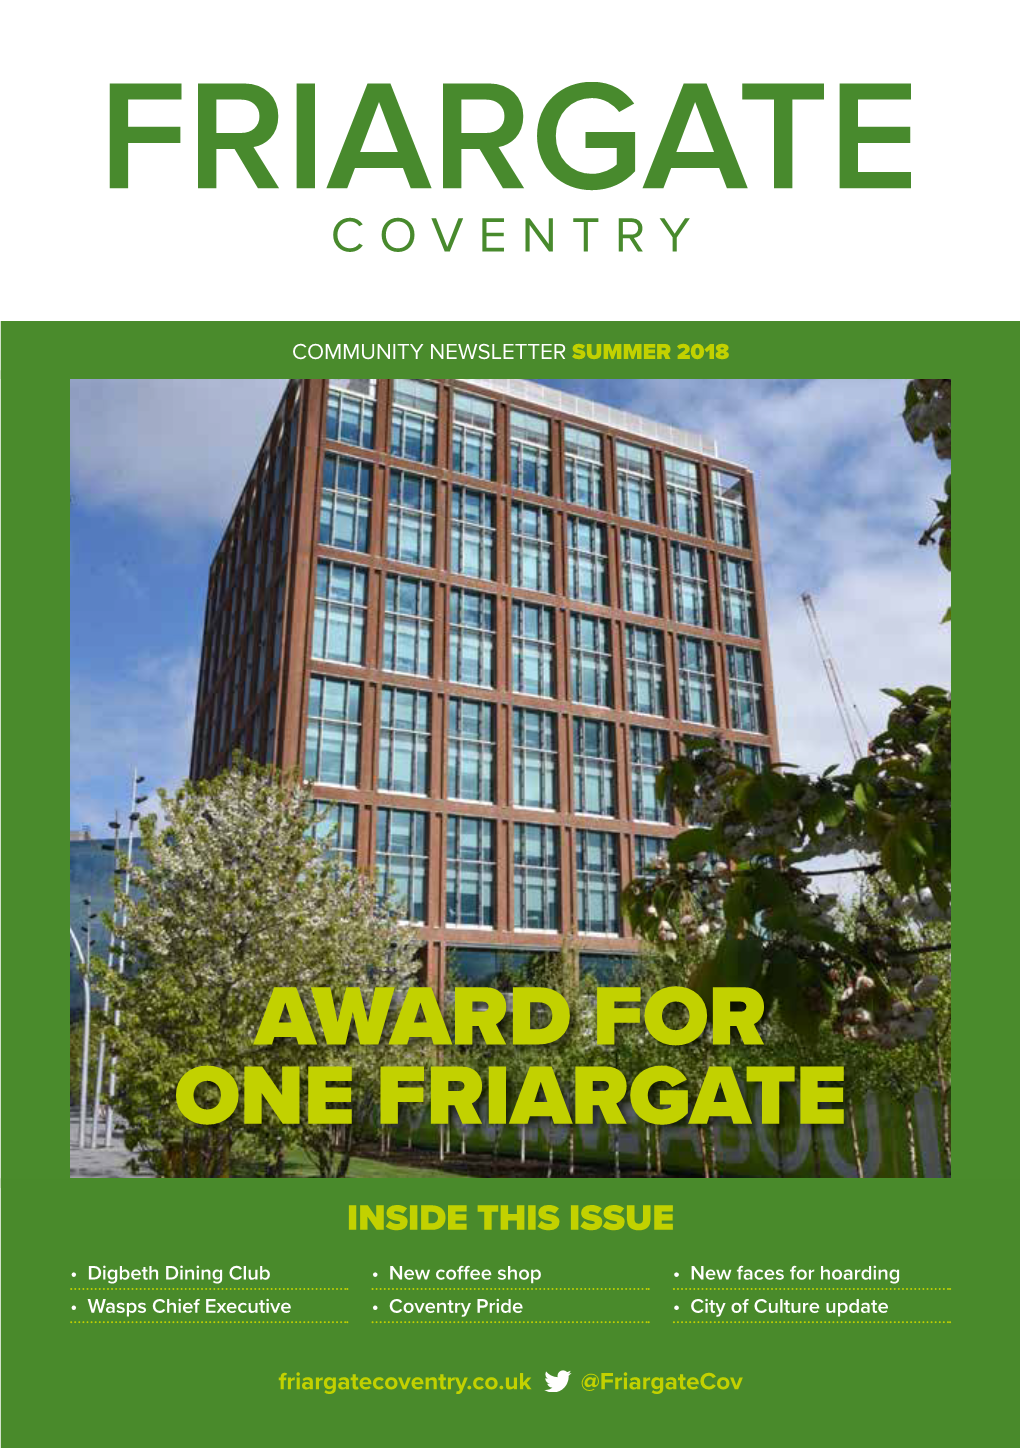 Award for One Friargate